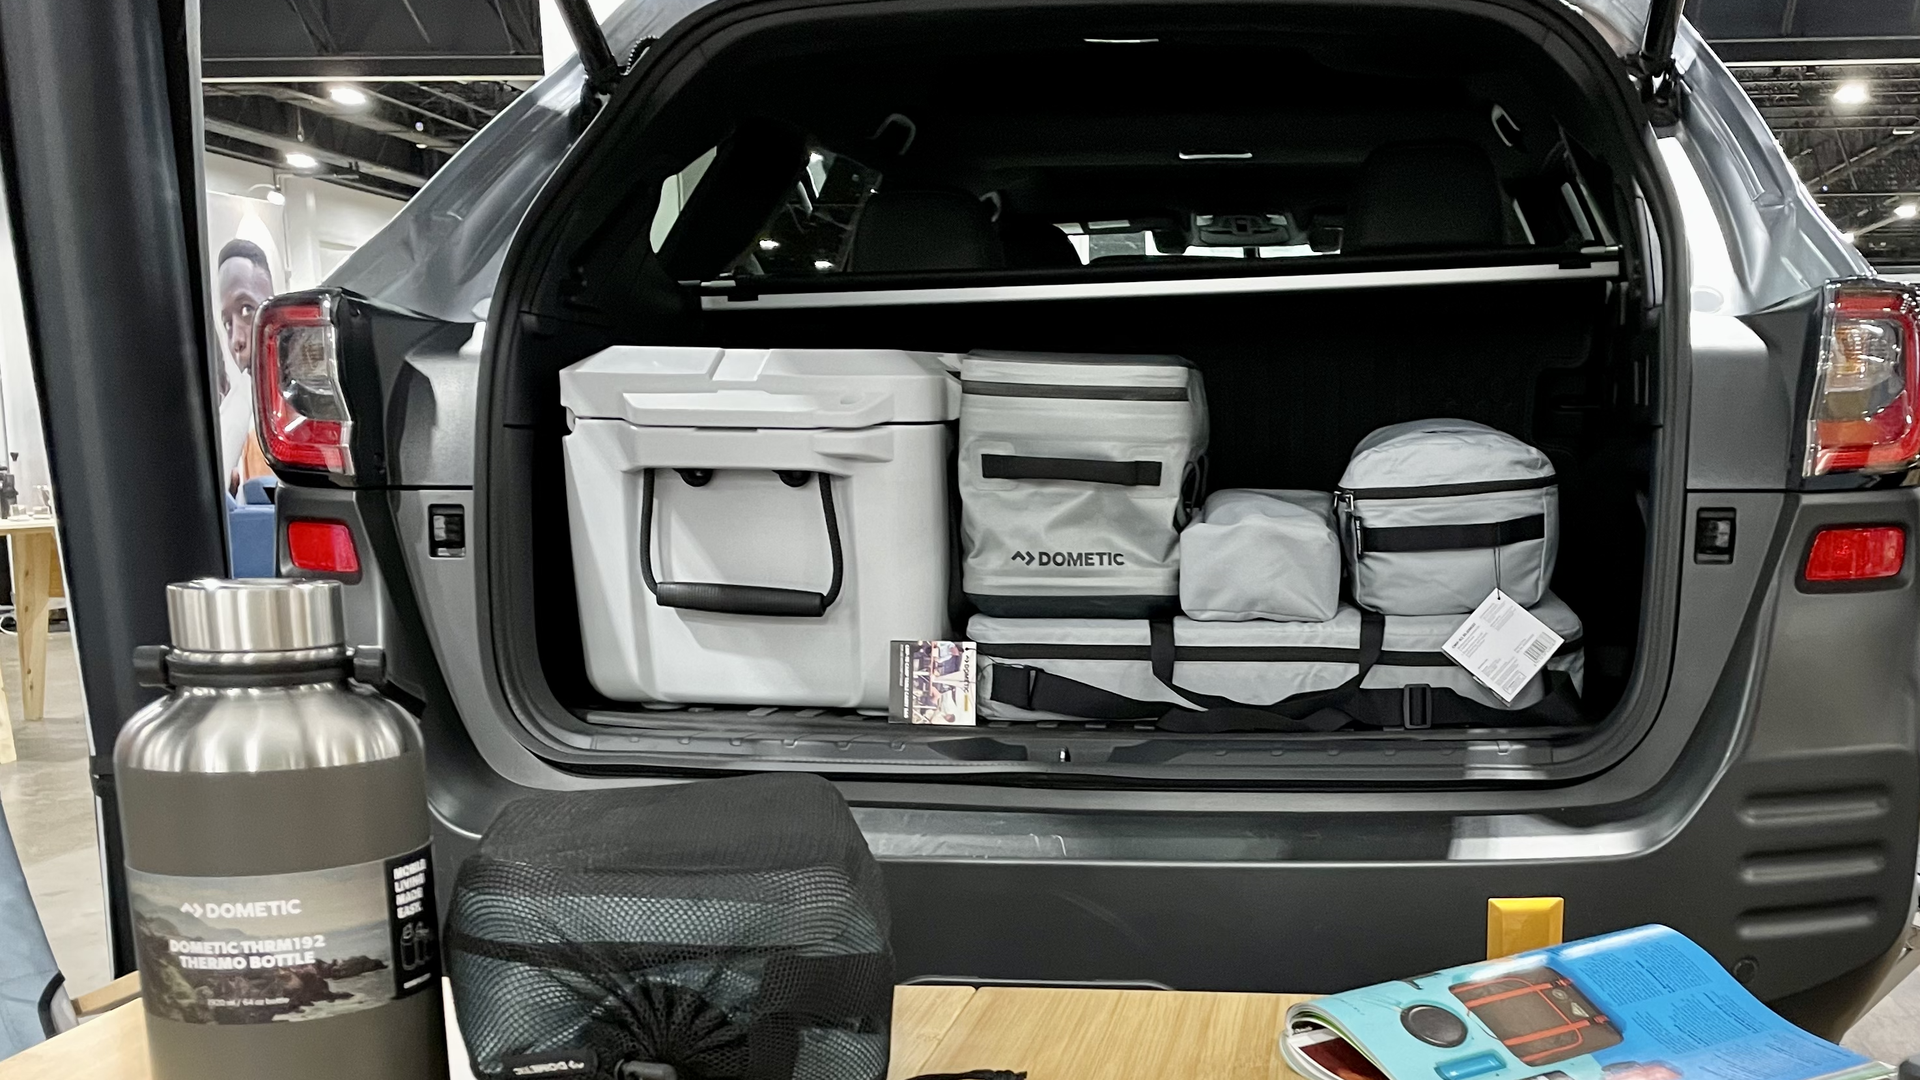 Dometic's gear is designed to fit into a Subaru. Photo: John Frank/Axios